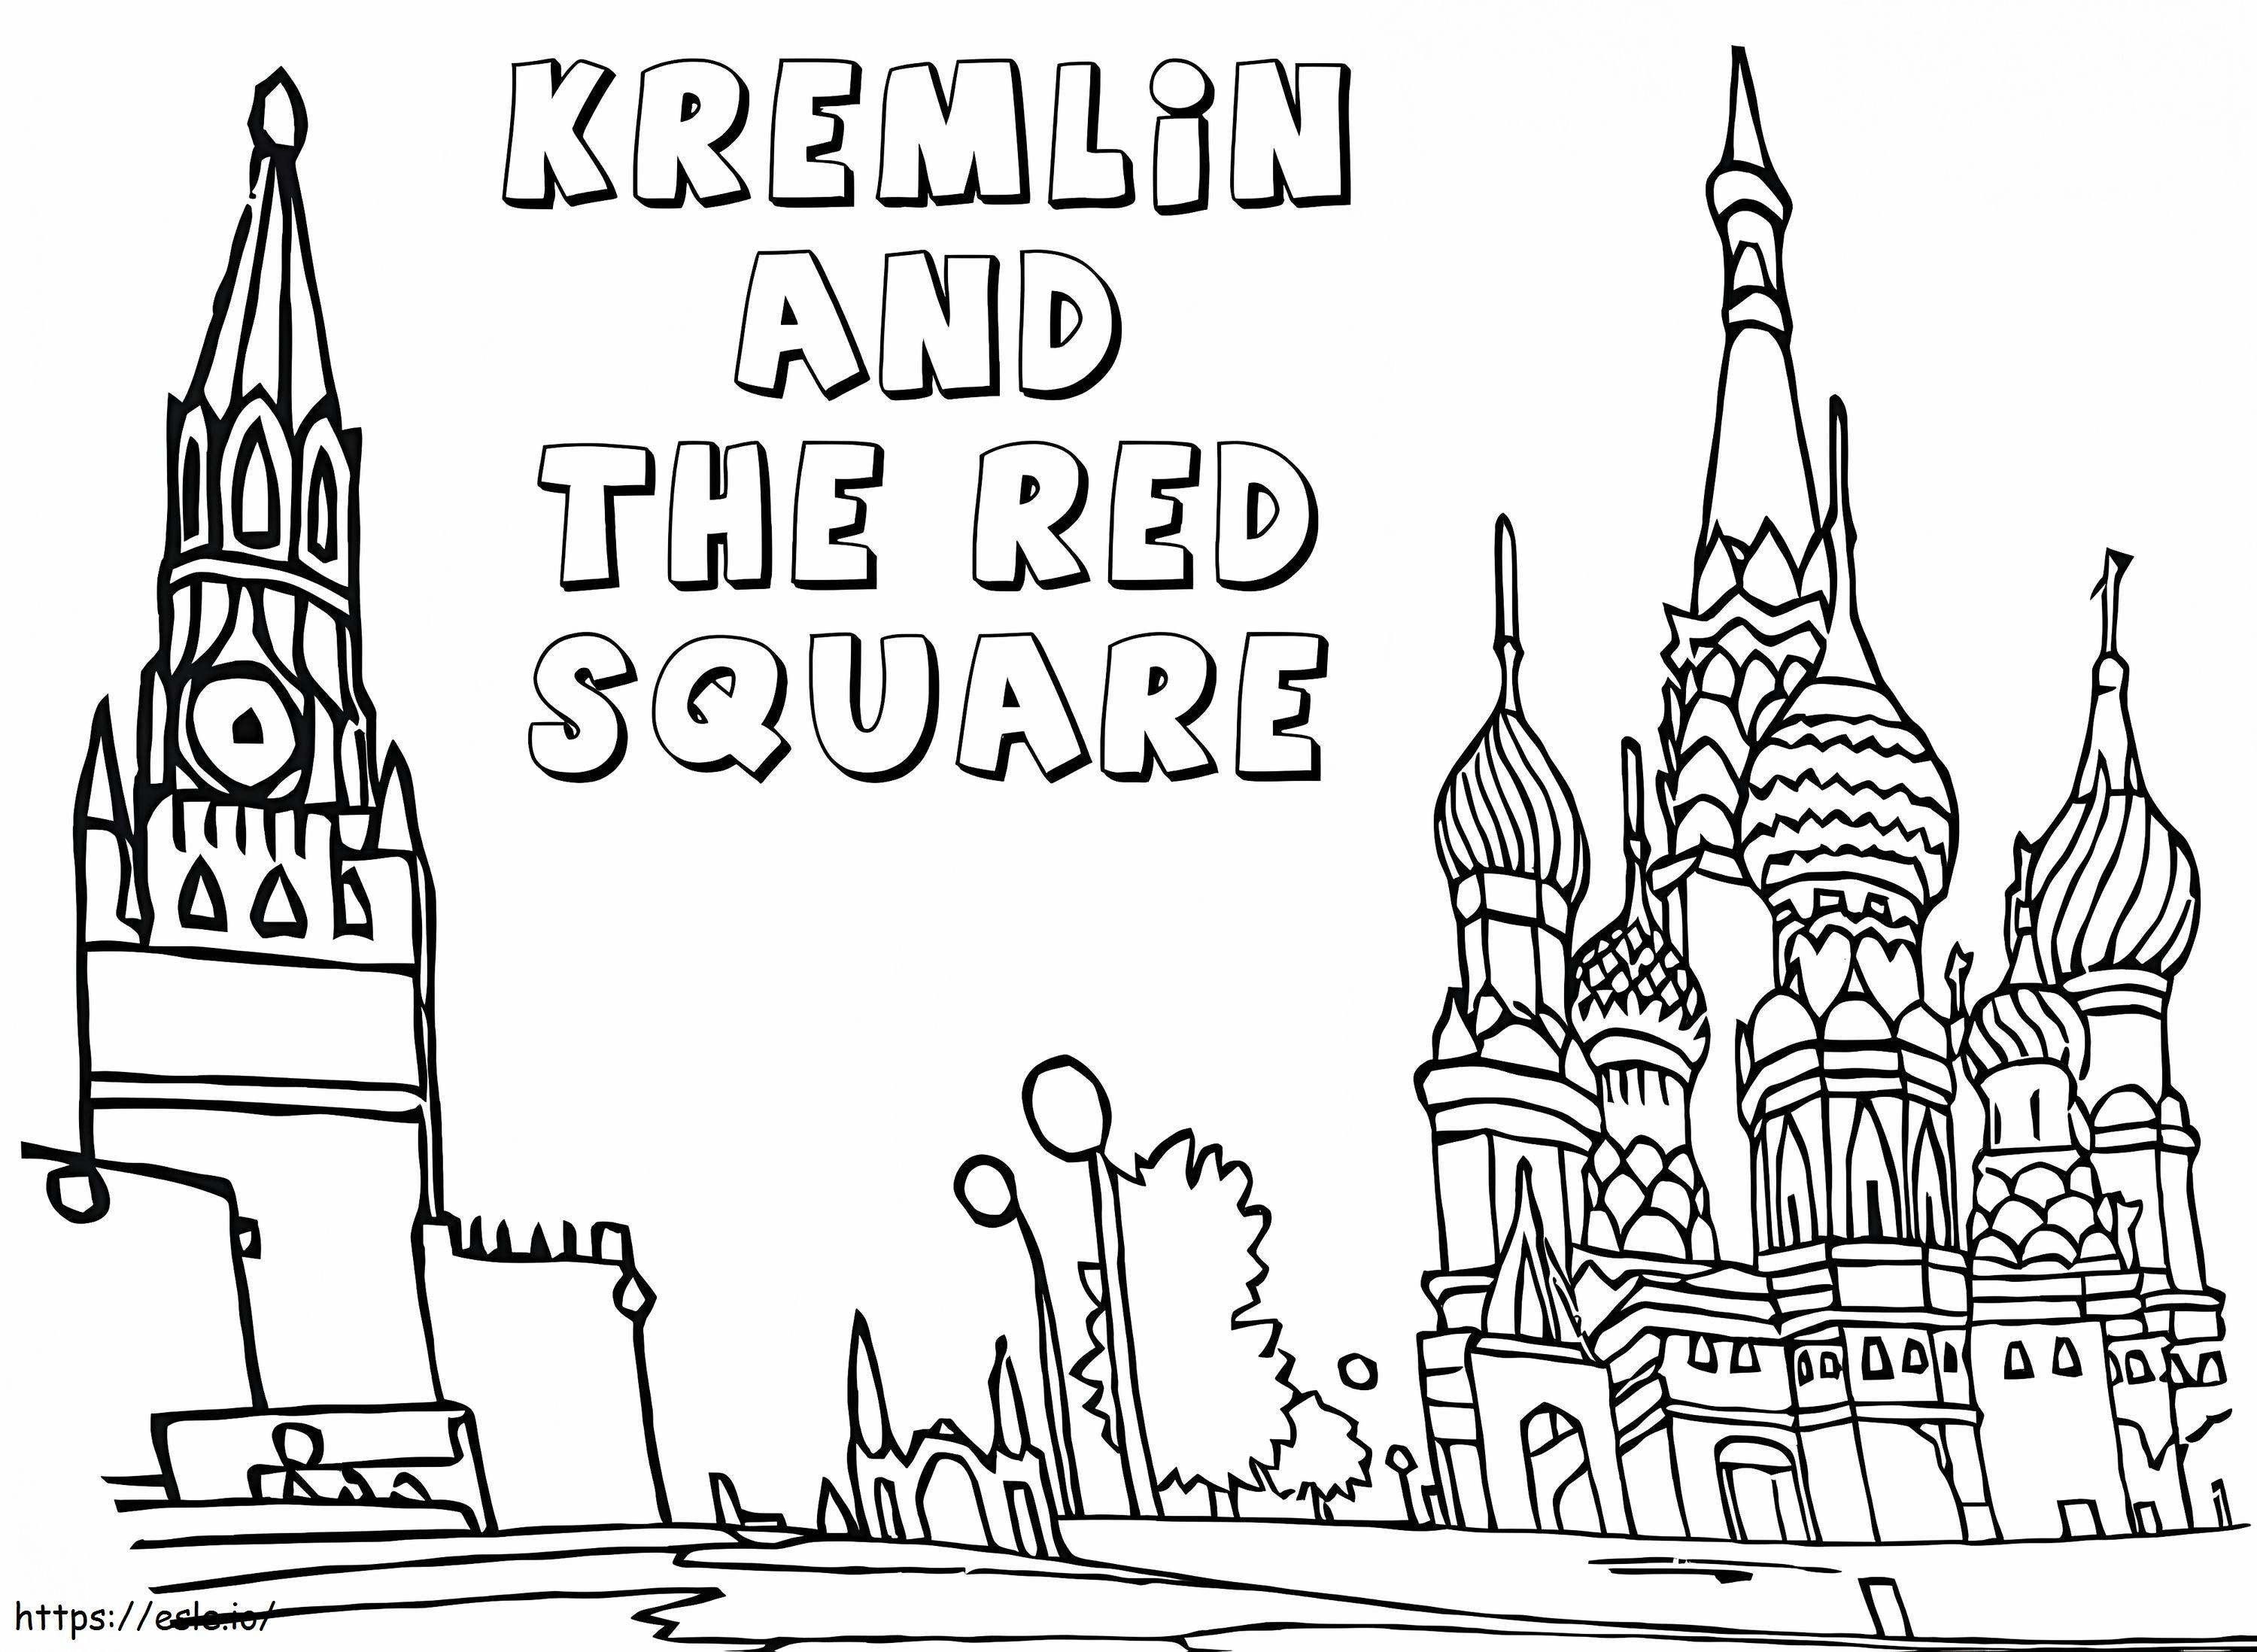 Kremlin And The Red Square coloring page